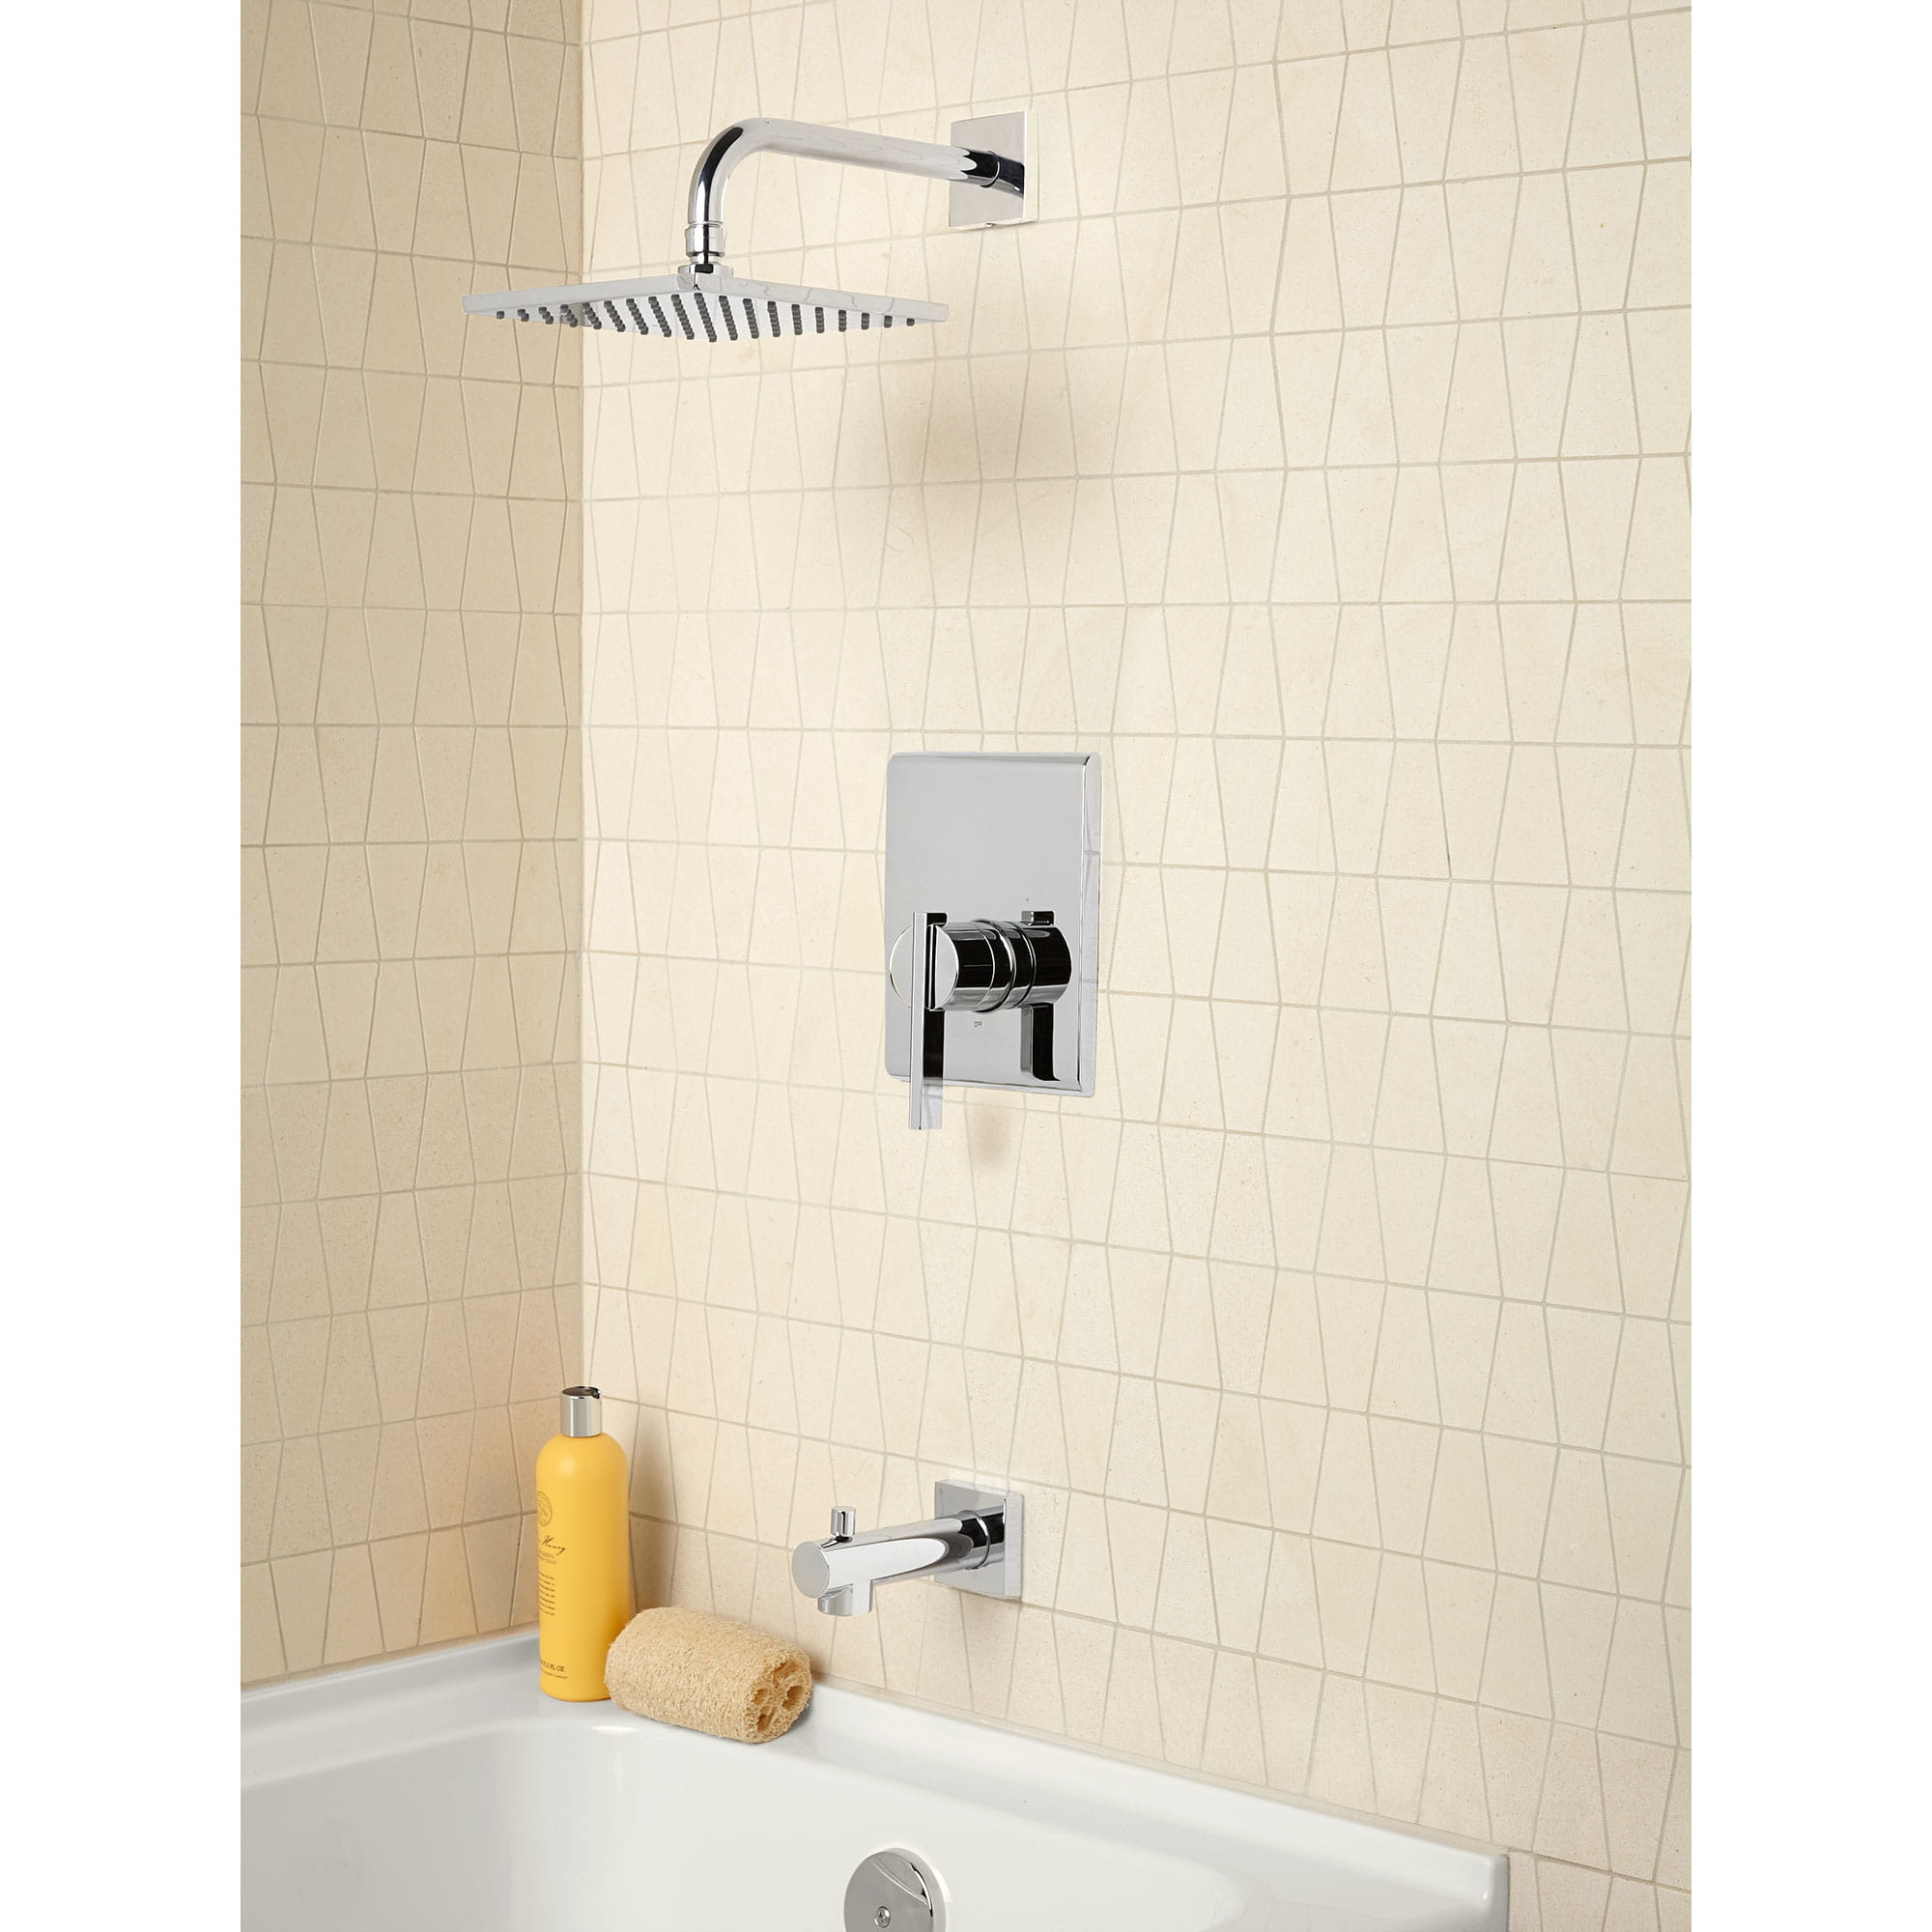 Times Square® 2.5 gpm/9.5 L/min Tub and Shower Trim Kit With Rain Showerhead, Double Ceramic Pressure Balance Cartridge With Lever Handle